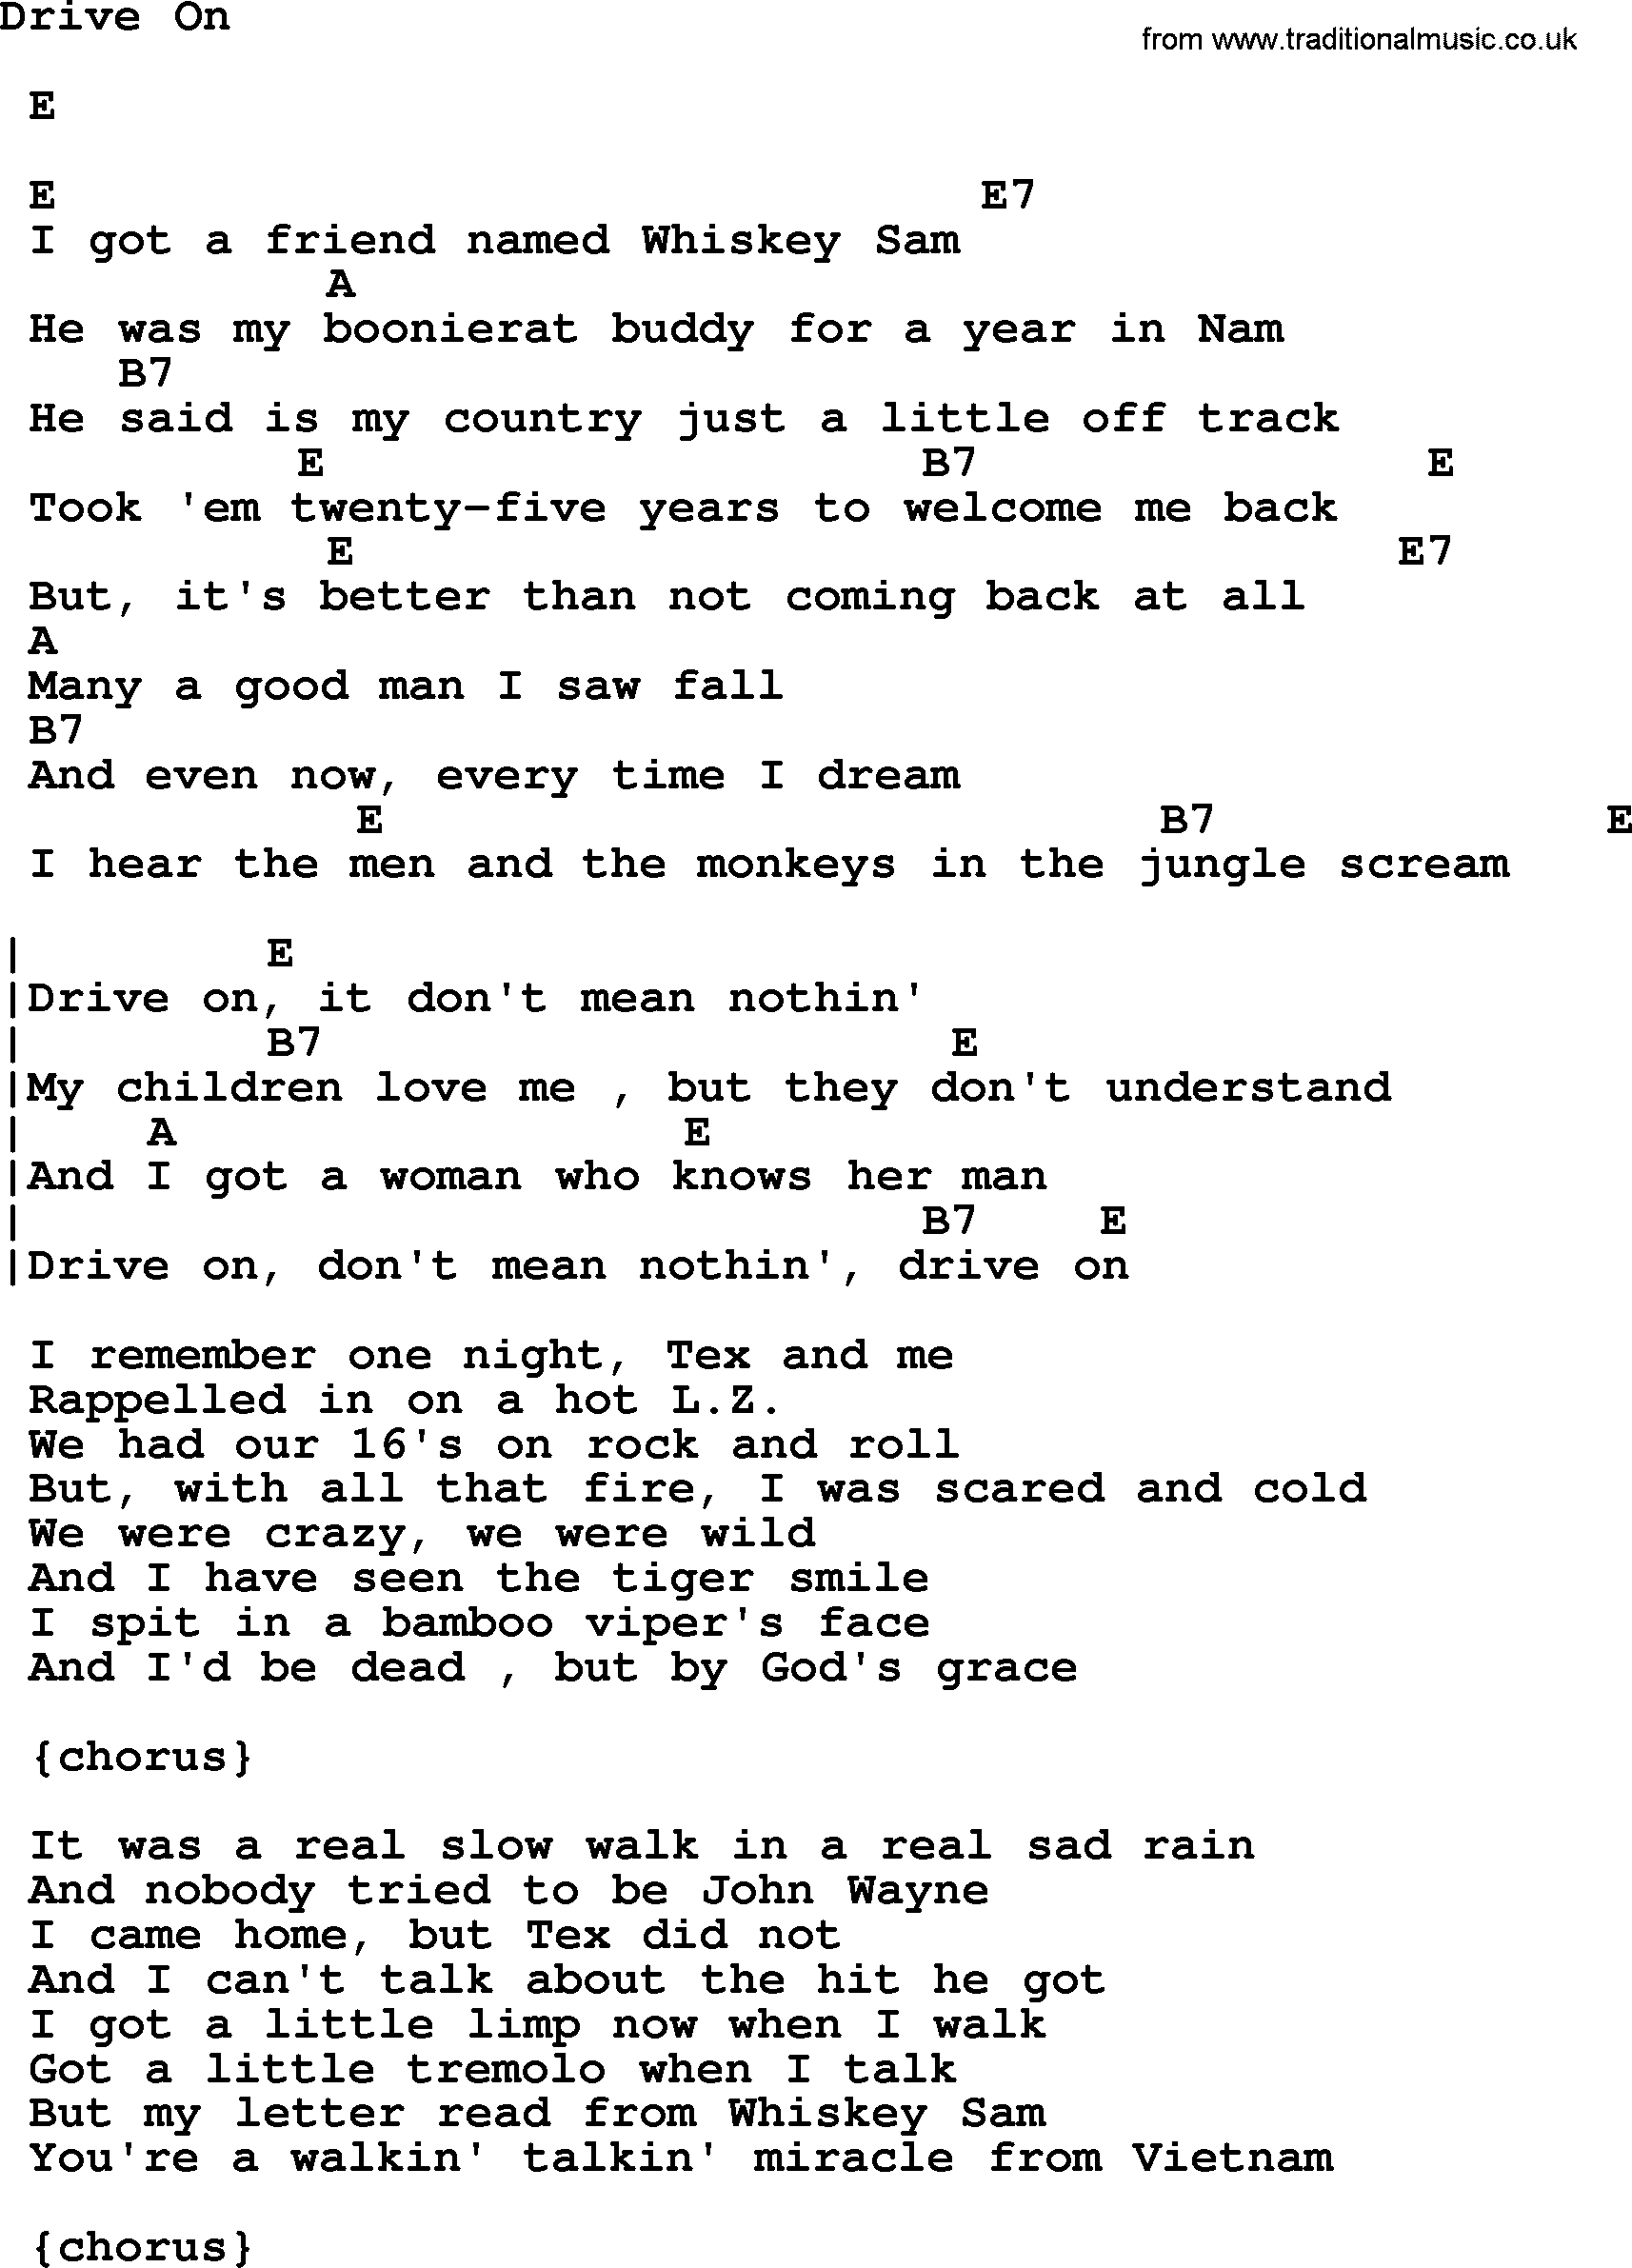 Johnny Cash song Drive On, lyrics and chords